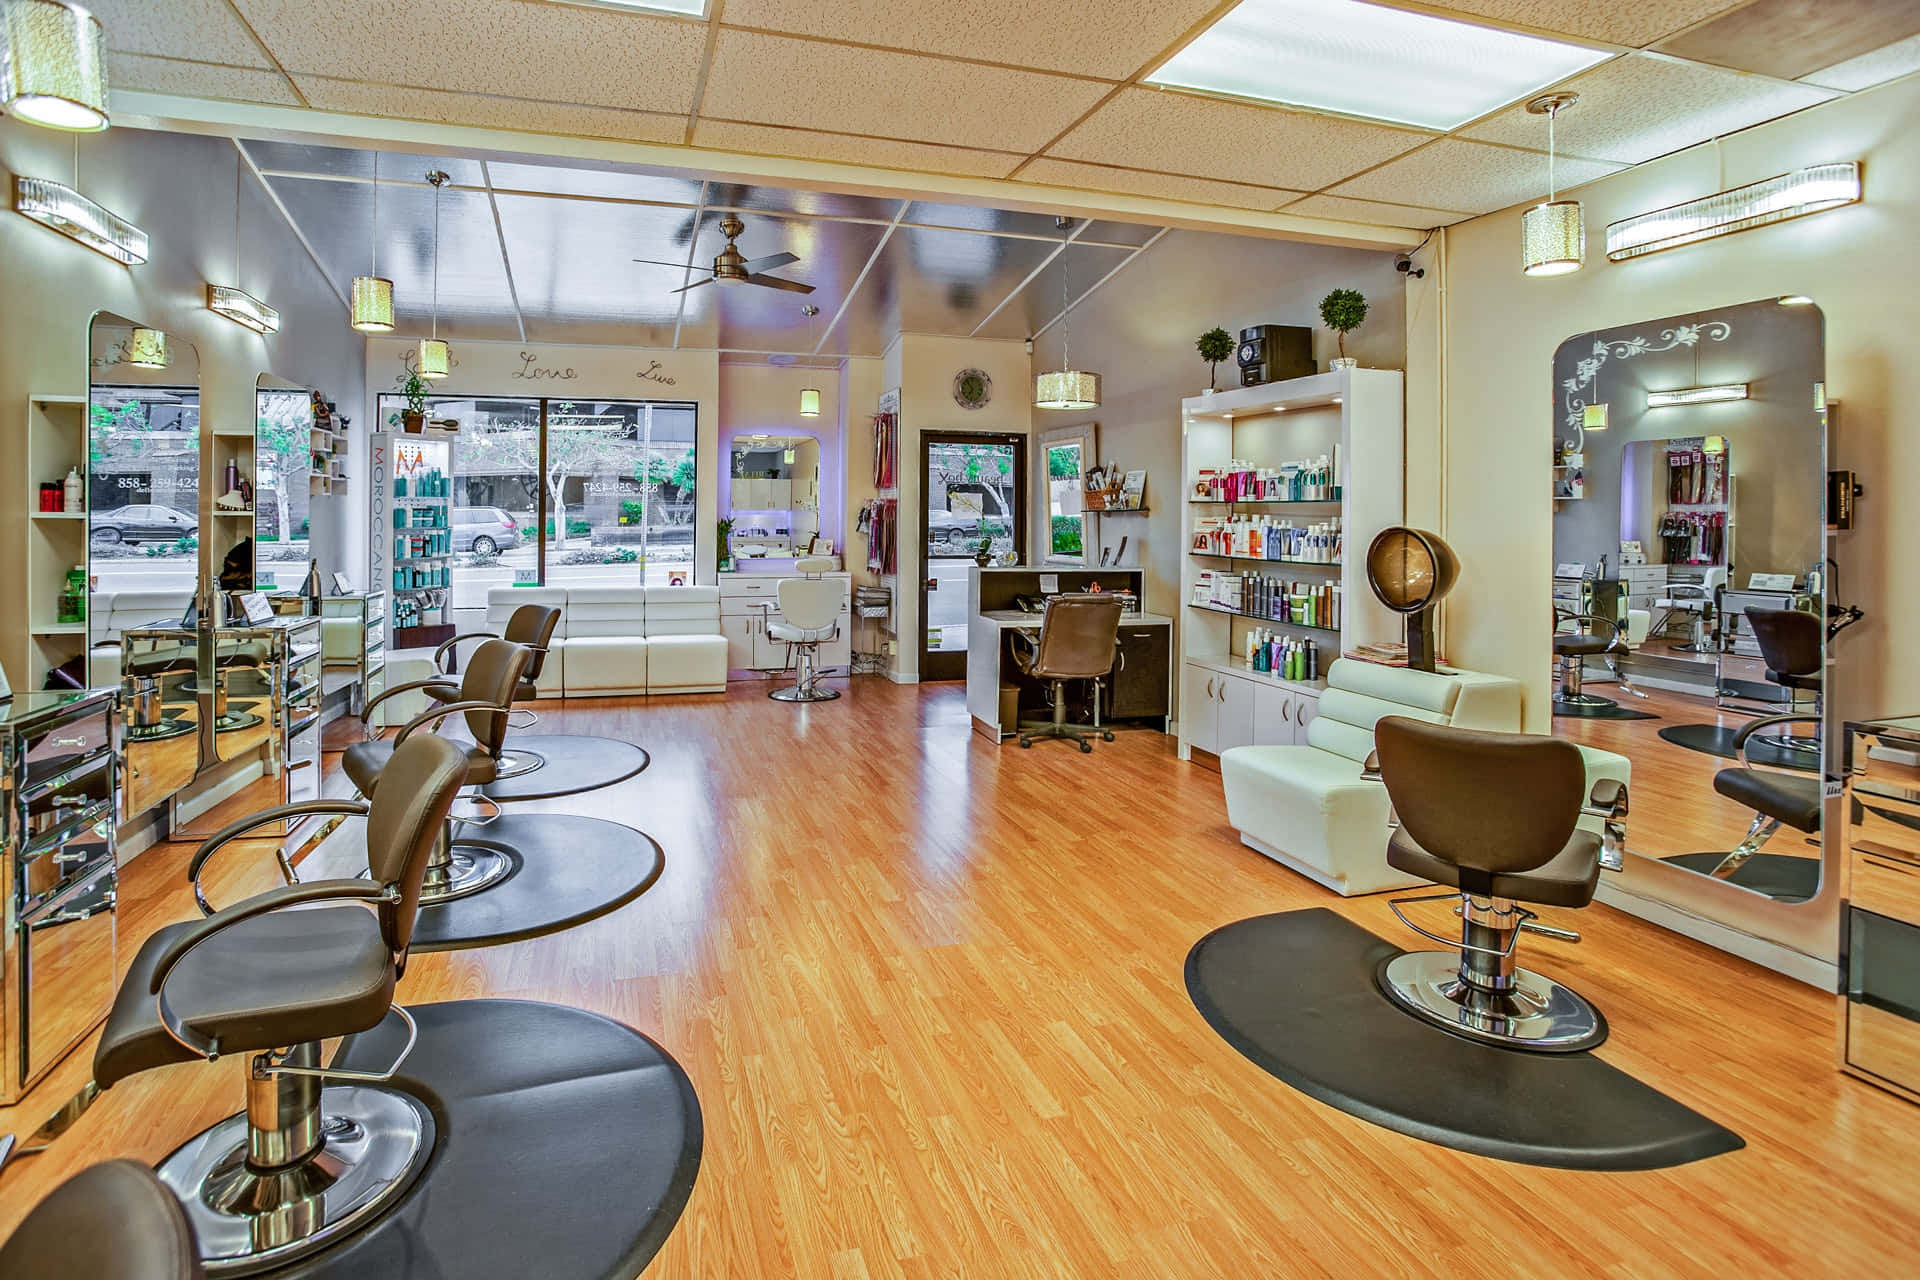 Modern Hair Salon Interior featured with Hairdressing Chairs, Hair Styling Tools, and Mirrors